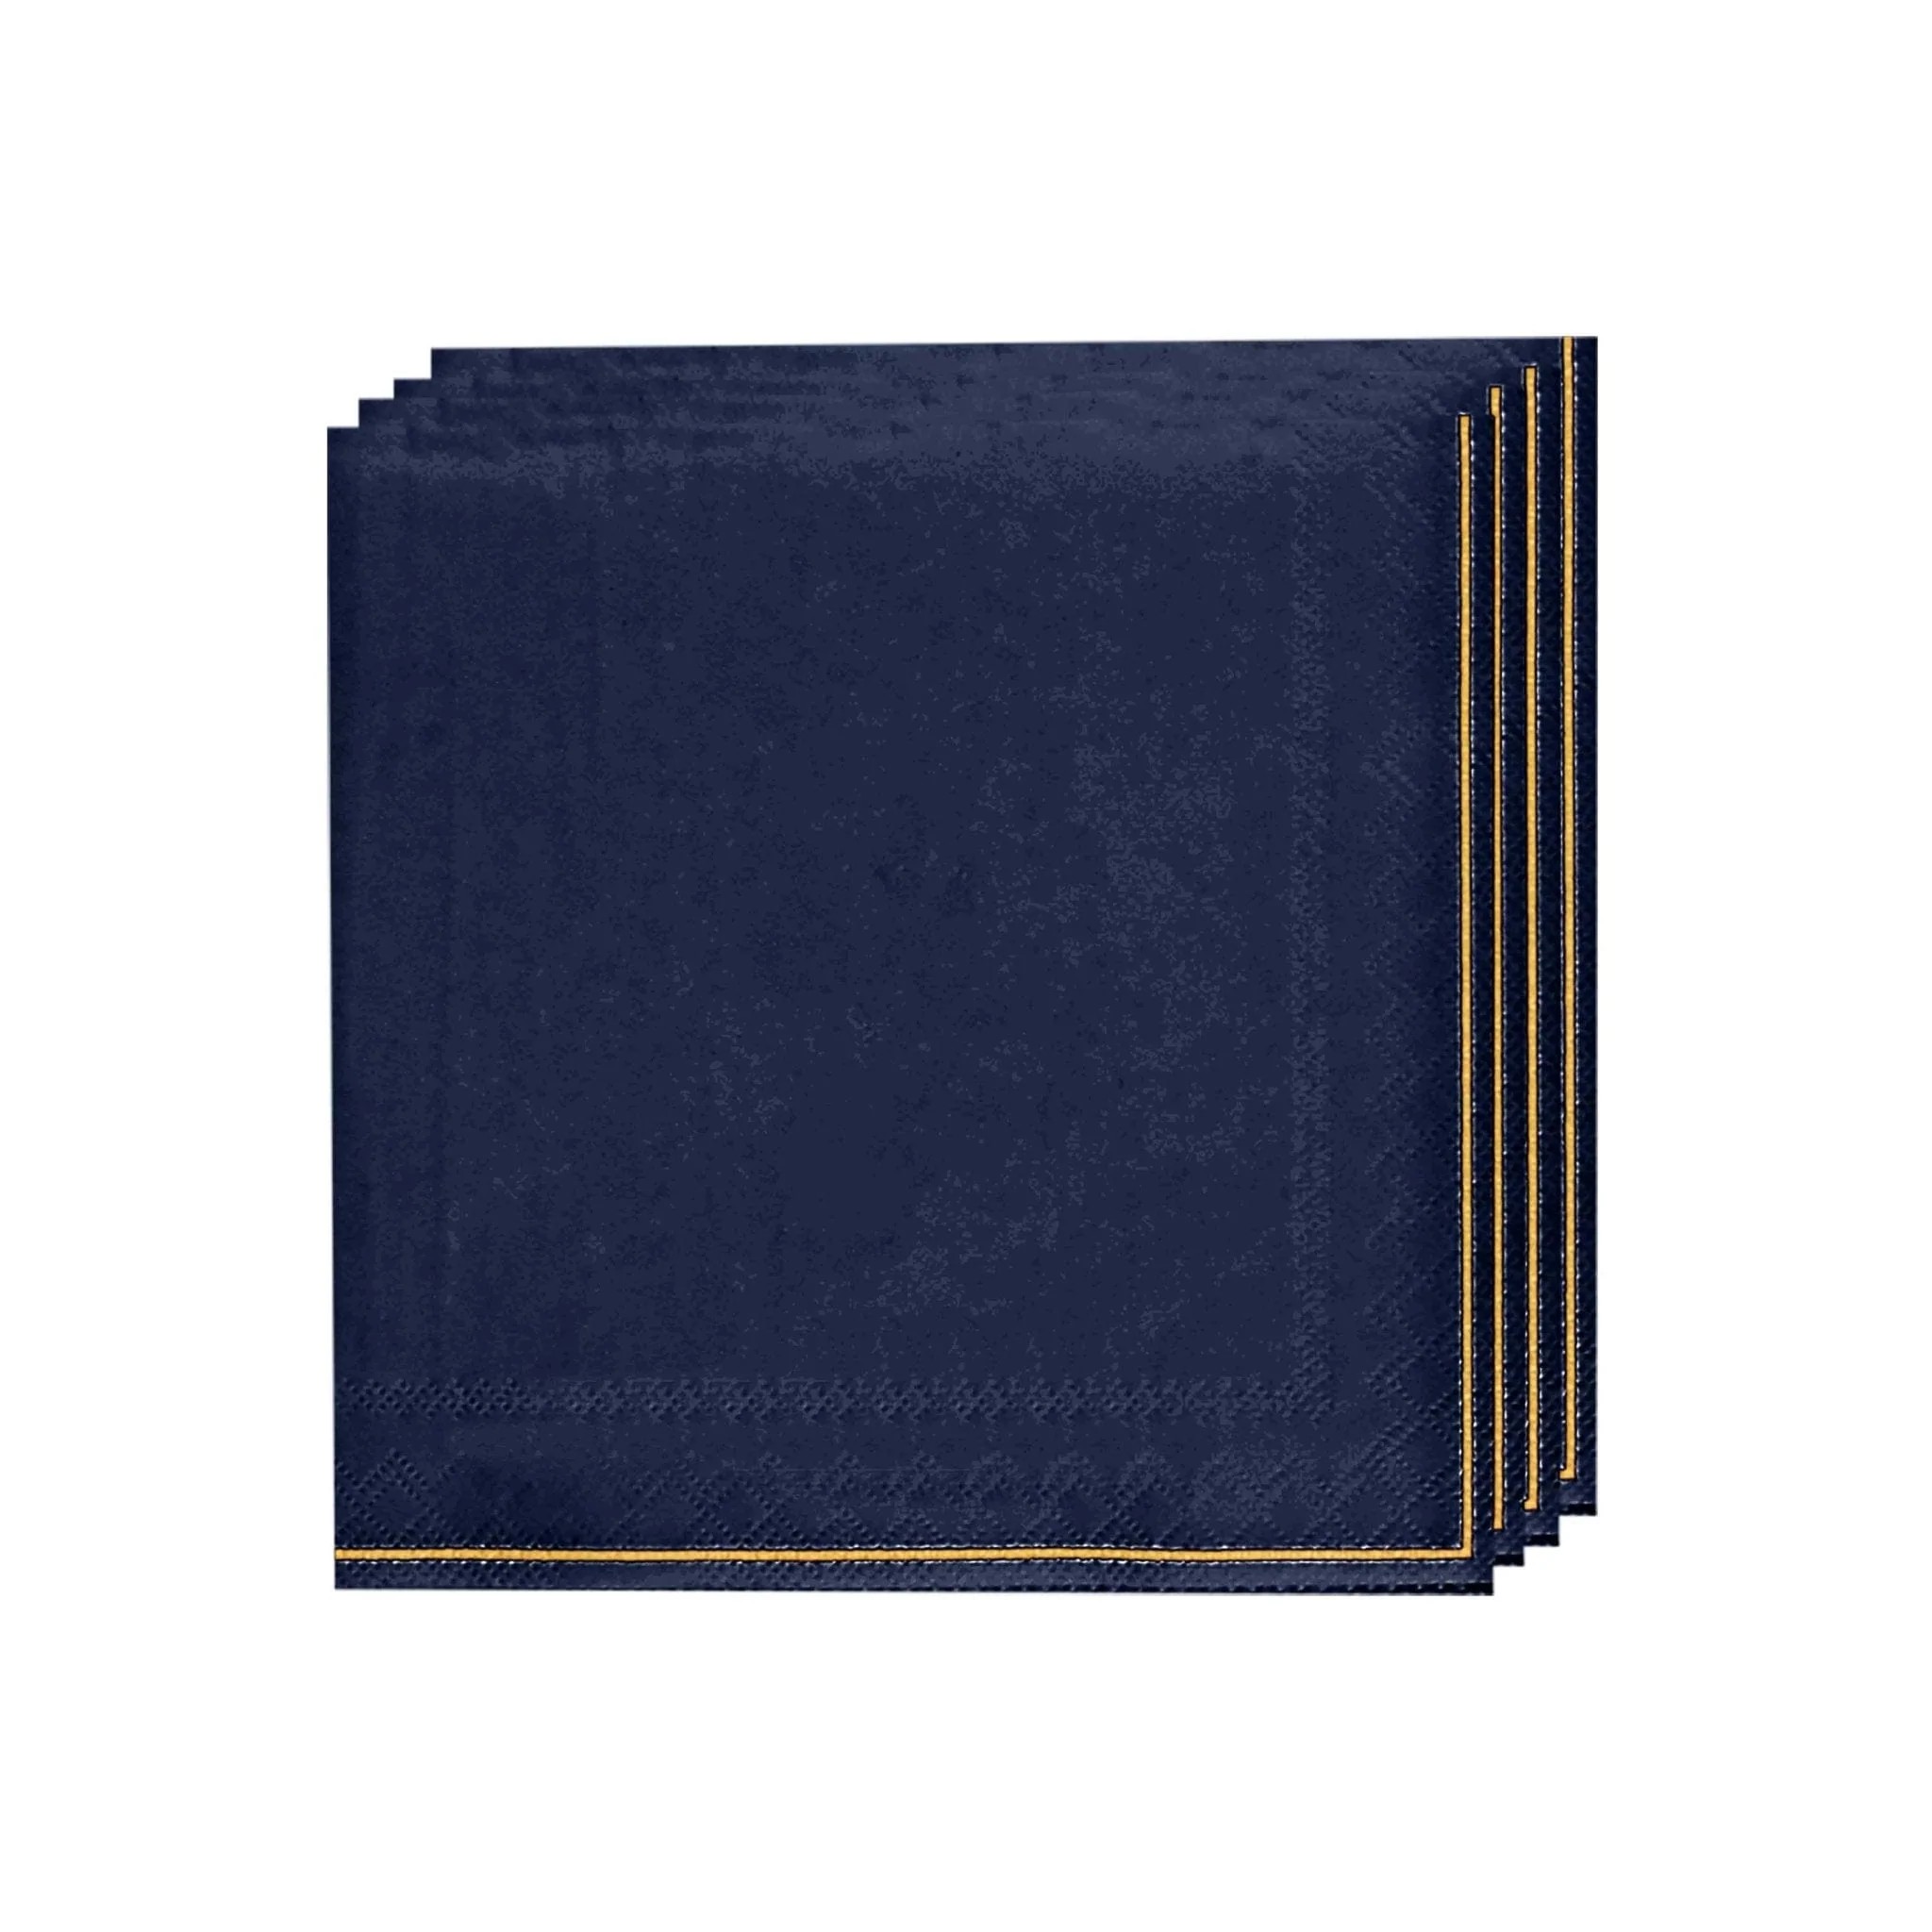 Luxe Party Navy with Gold Stripe Beverage Napkins - 20 pcs